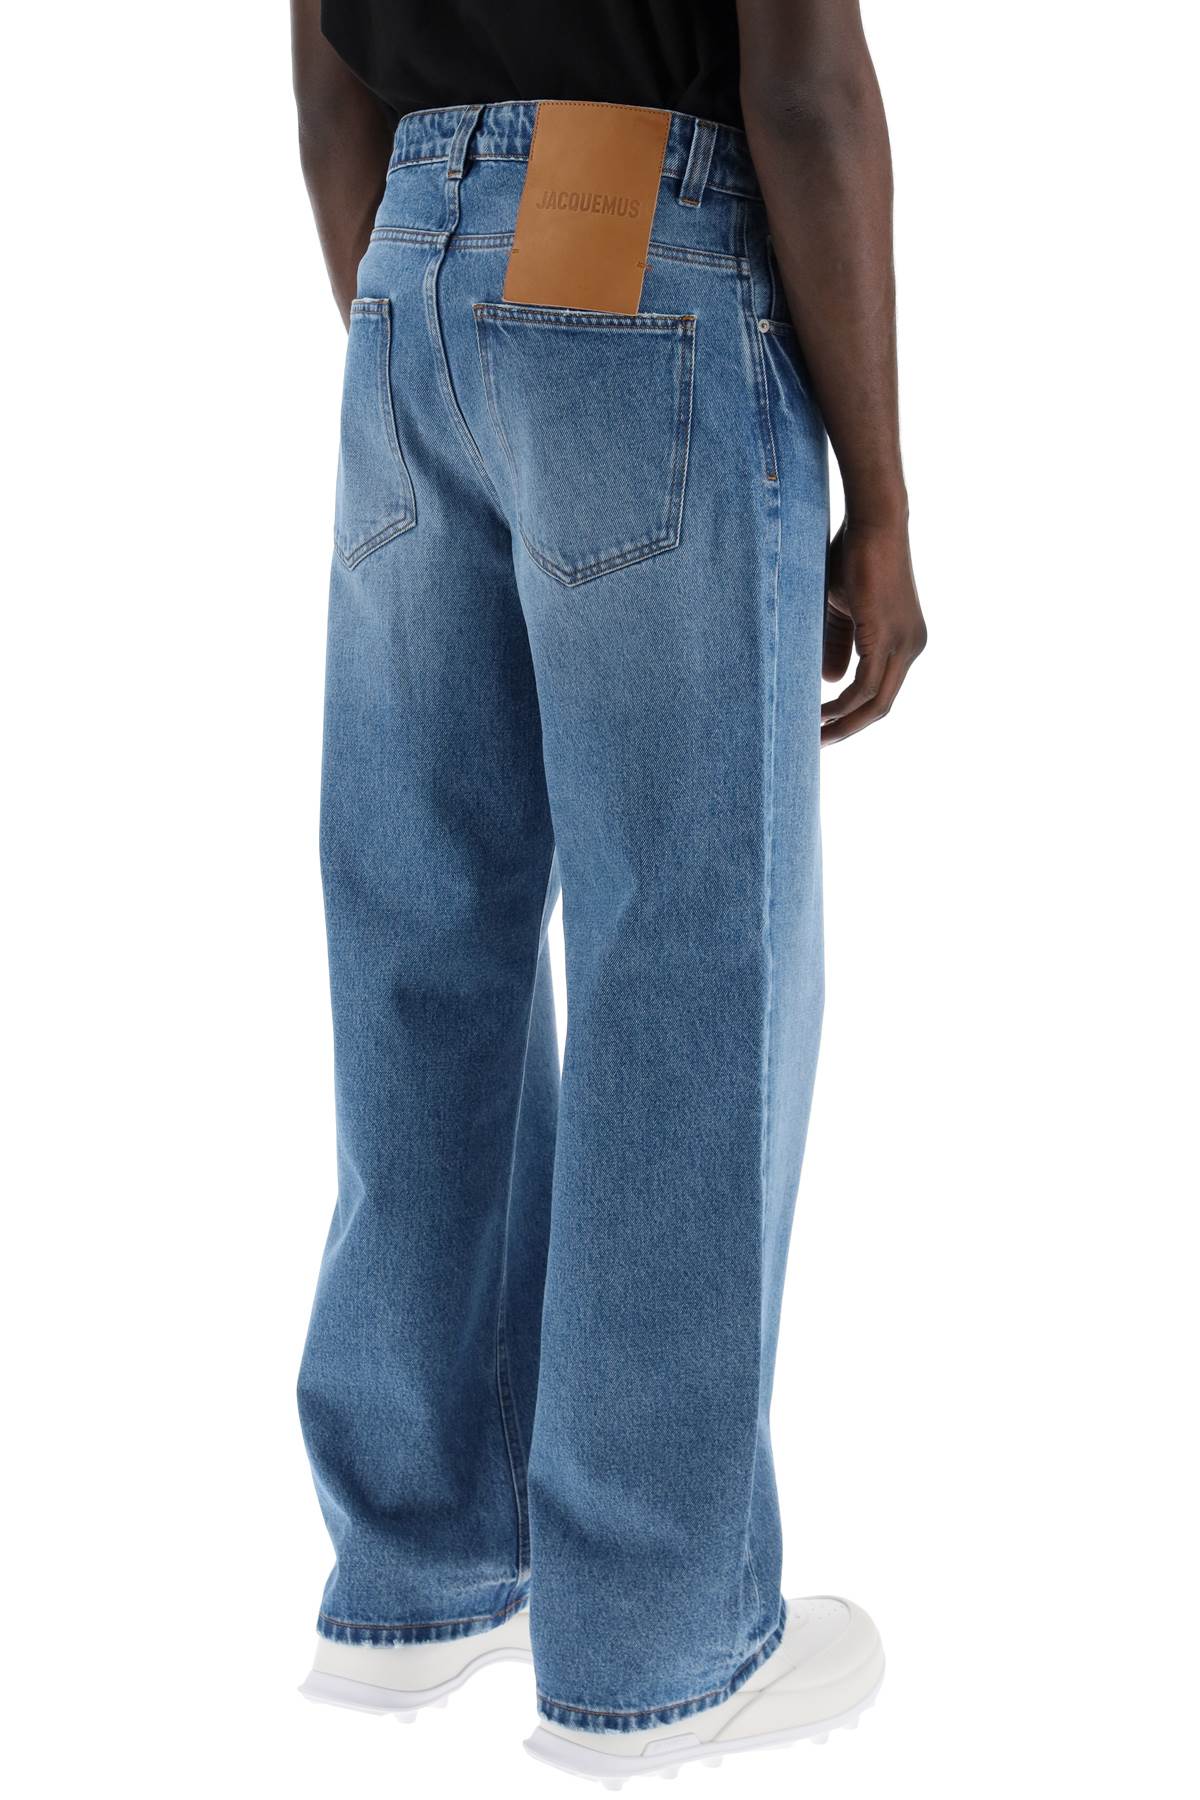 Jacquemus large denim jeans from nimes-2